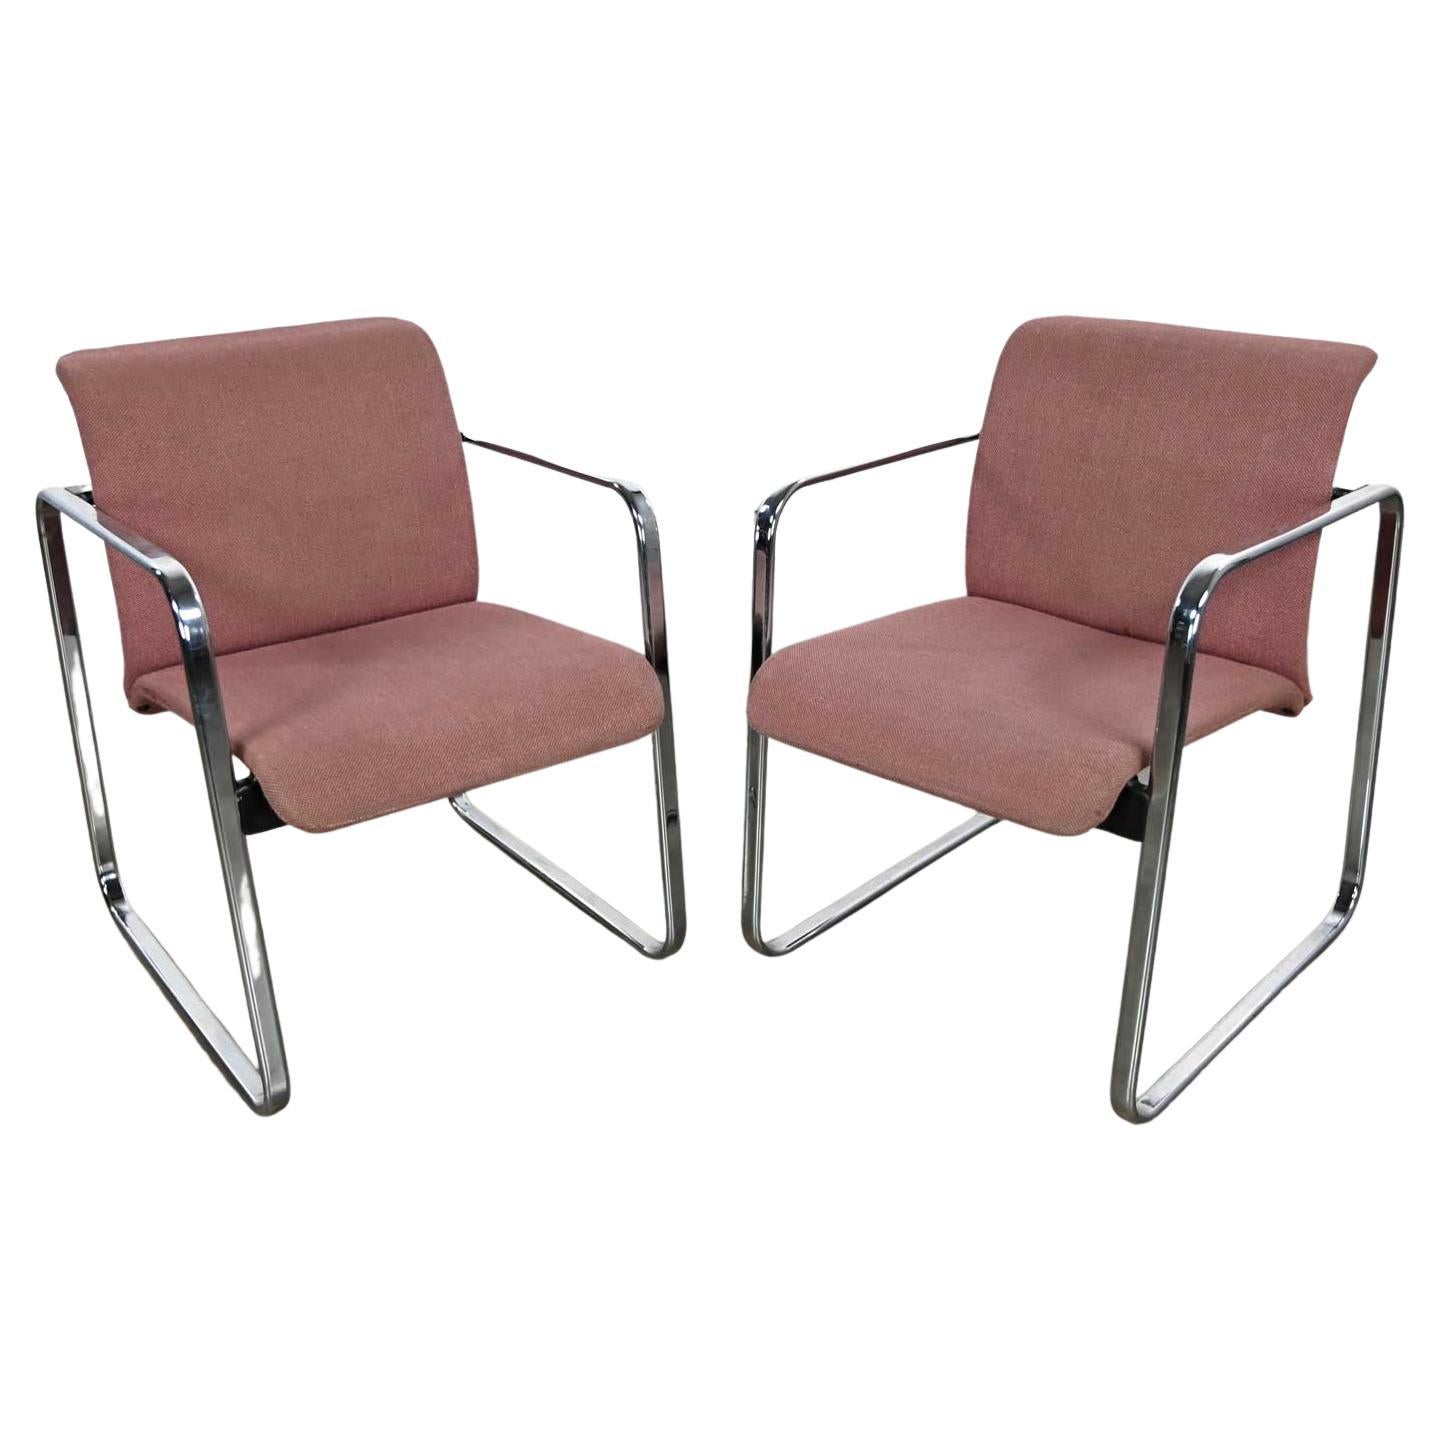 MCM Mauve Hopsacking & Chrome Tubular Chairs by Peter Protzman for Herman Miller For Sale